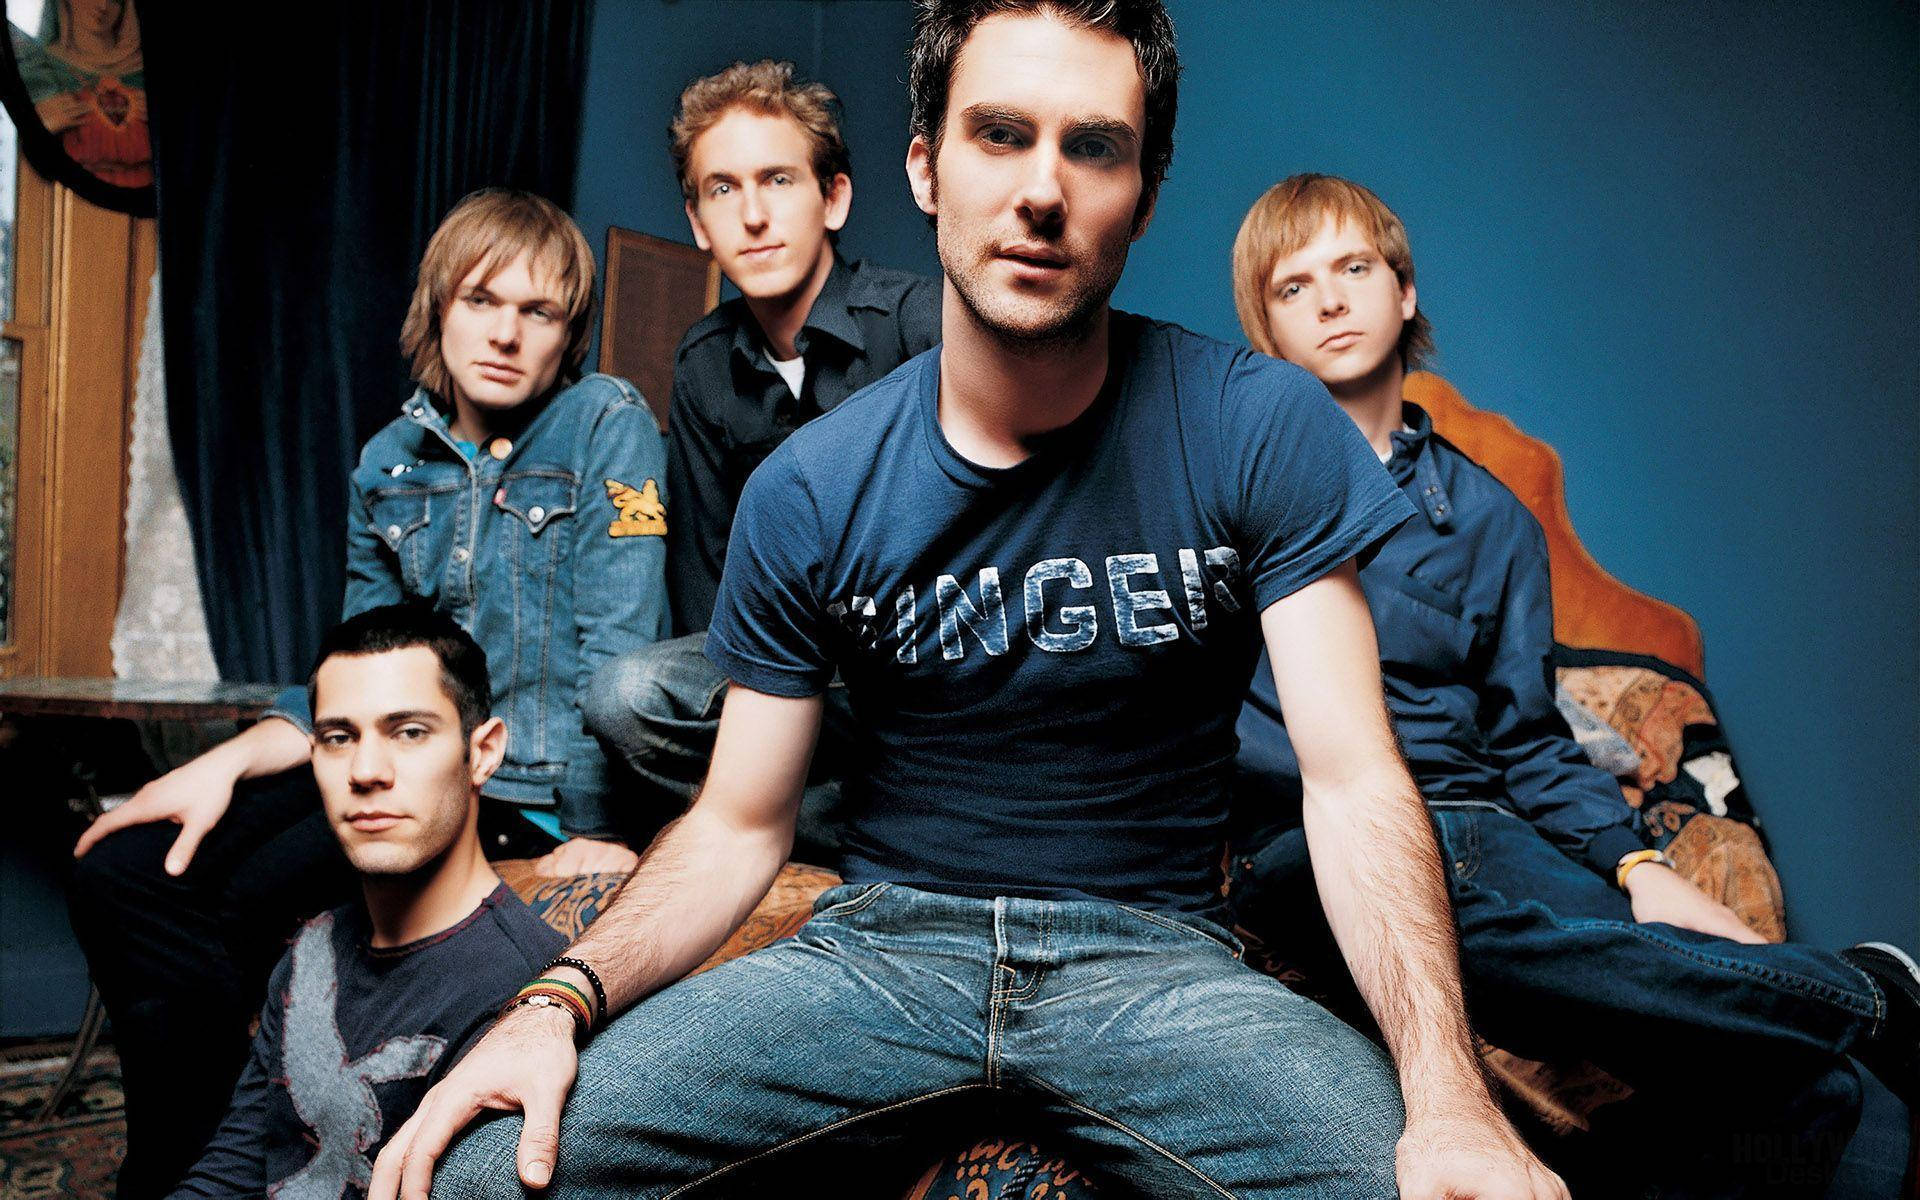 Caption: Maroon 5 Band Members in Blue Ensemble in a Blue Room Wallpaper